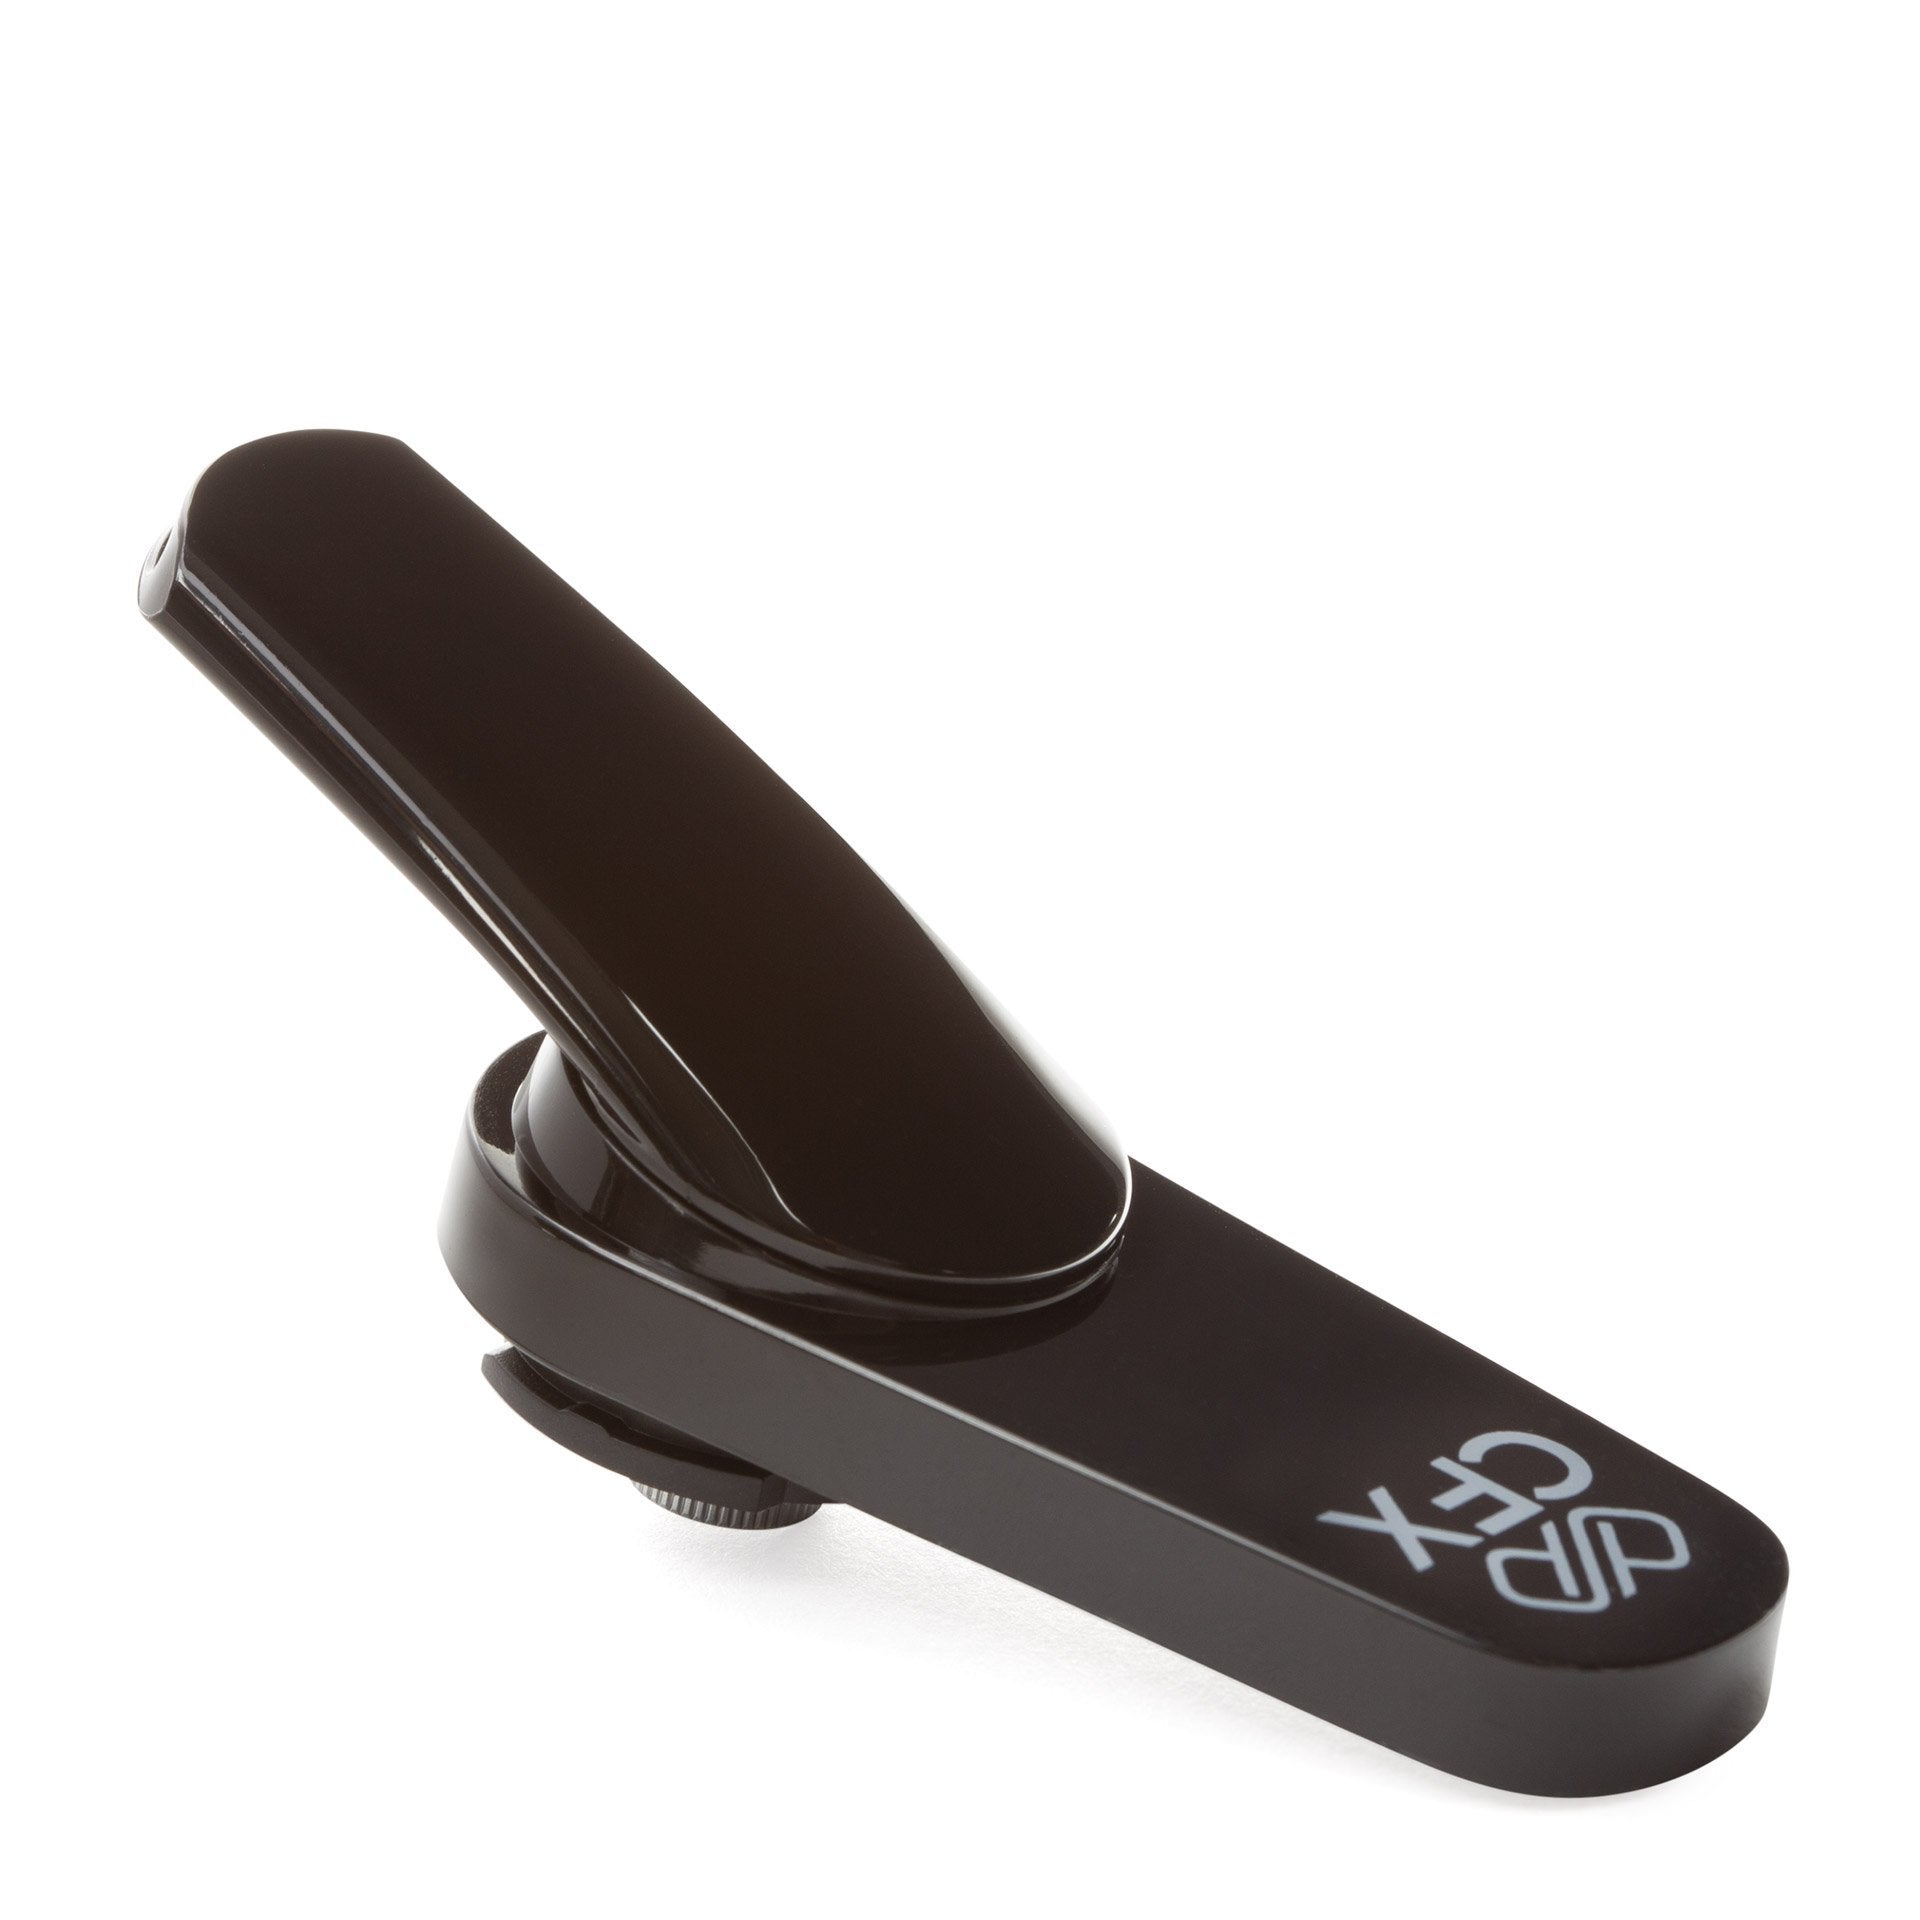 Boundless CFX Replacement Mouthpiece - 420 Science - The most trusted online smoke shop.